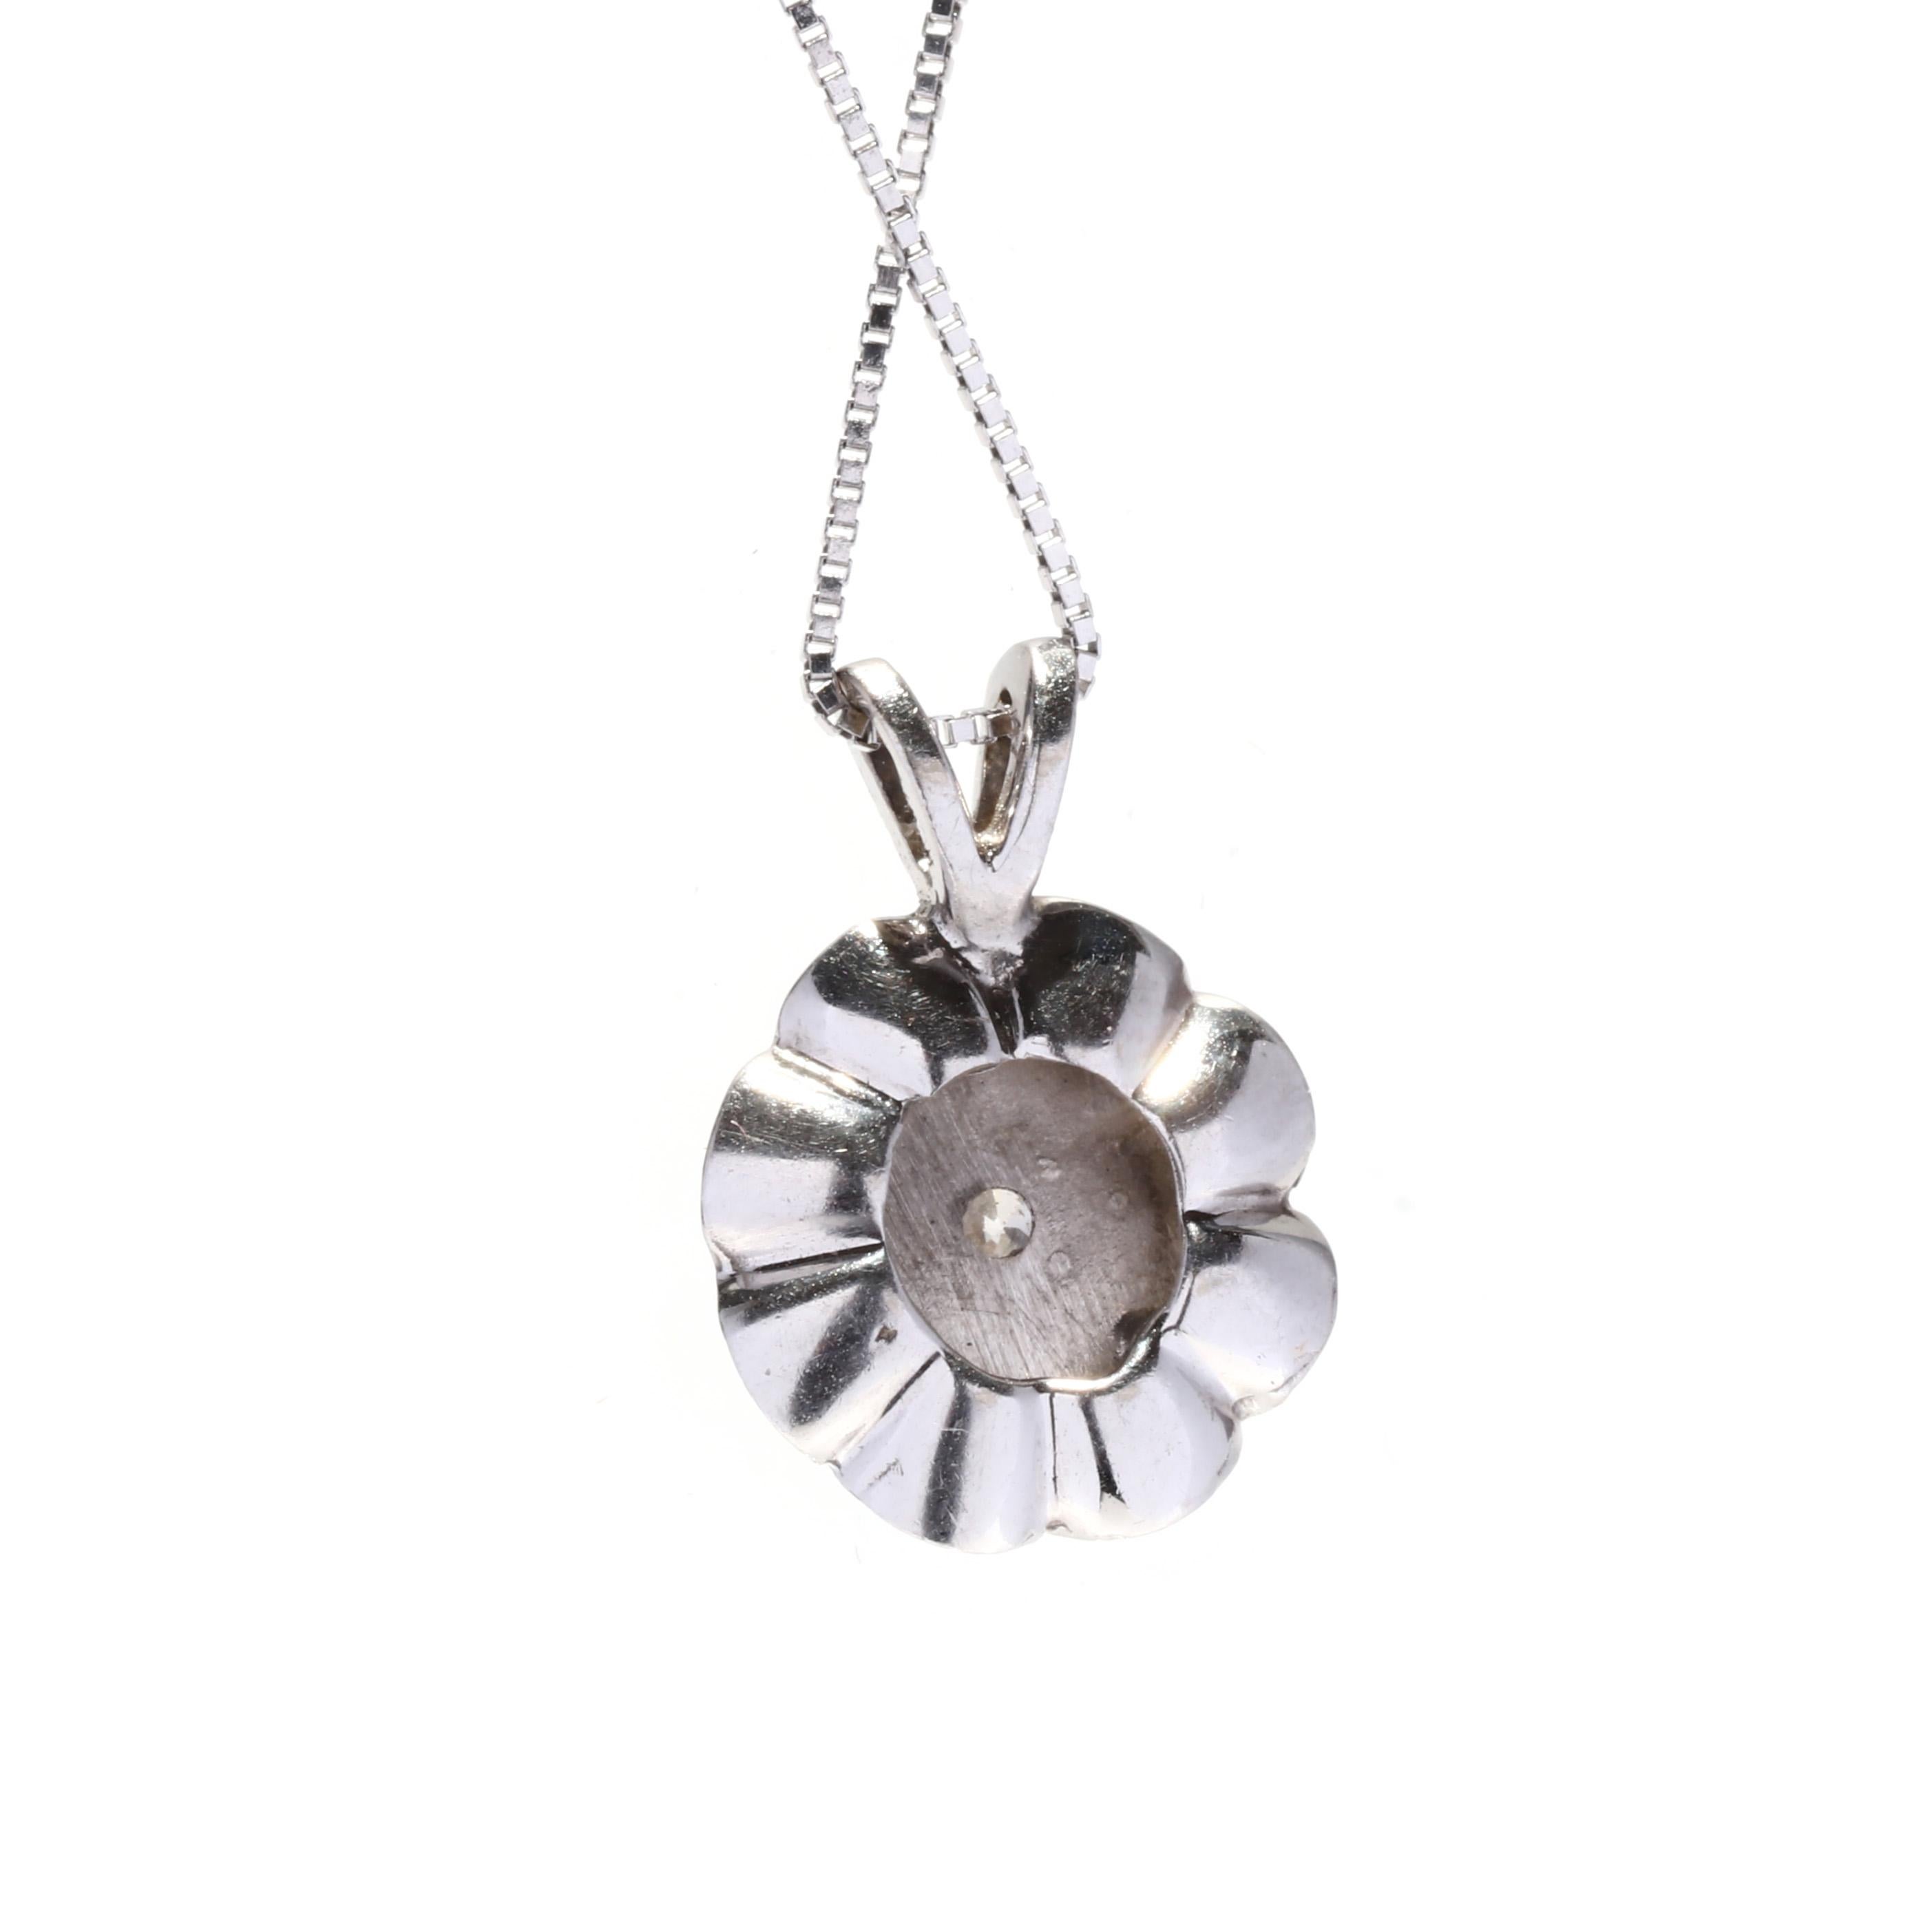 A 14 karat white gold vintage diamond solitaire necklace. This diamond flower necklace features a prong set full cut round diamond weighing approximately .11 carat set in a floral motif pendant suspended from a thin box chain.

Stones:
- diamond, 1